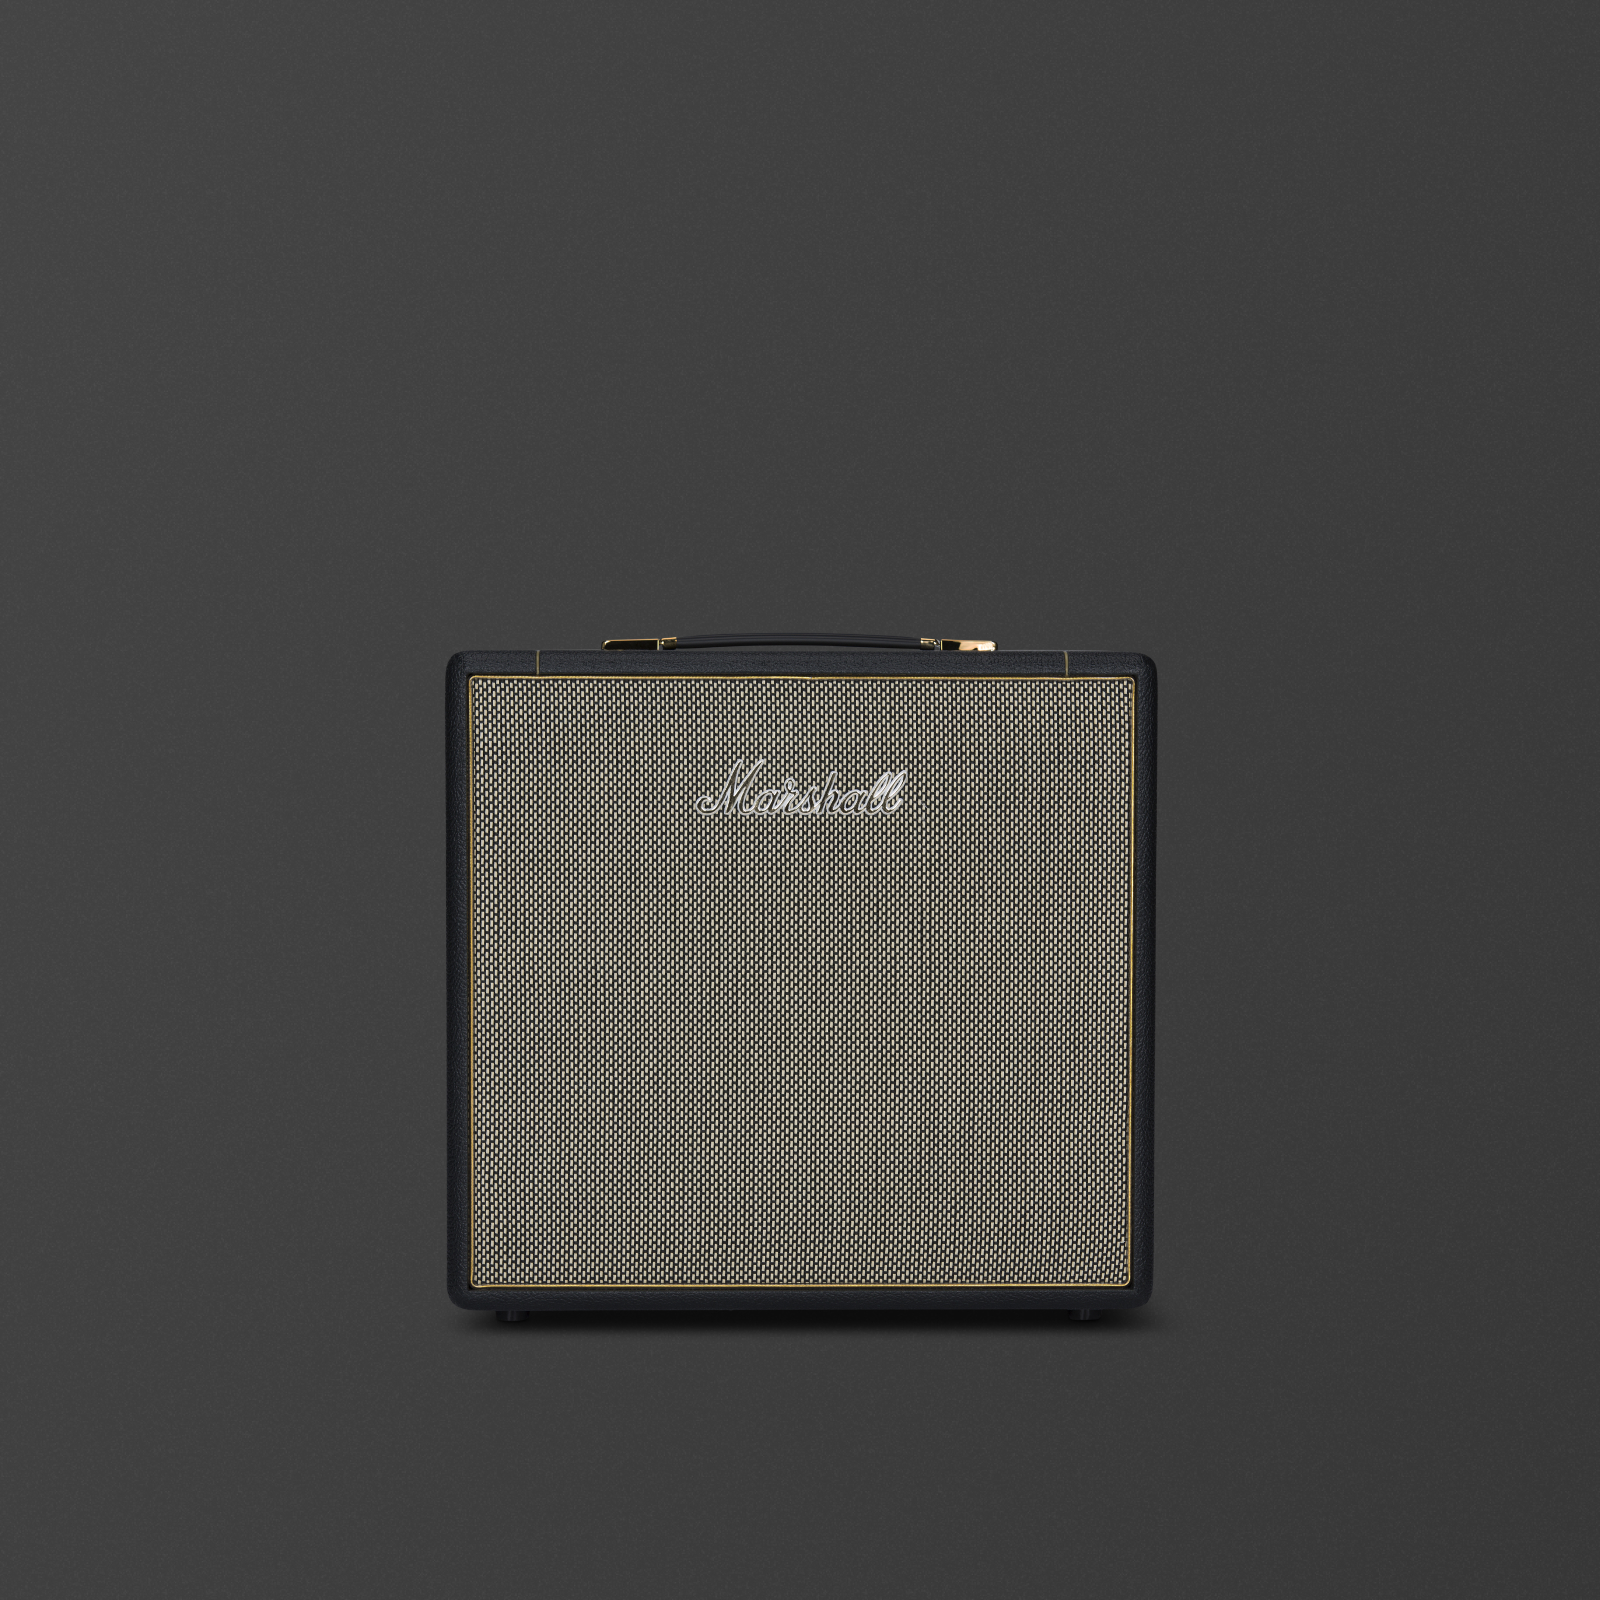 Image of the front of the Marshall SV112 Cabinet